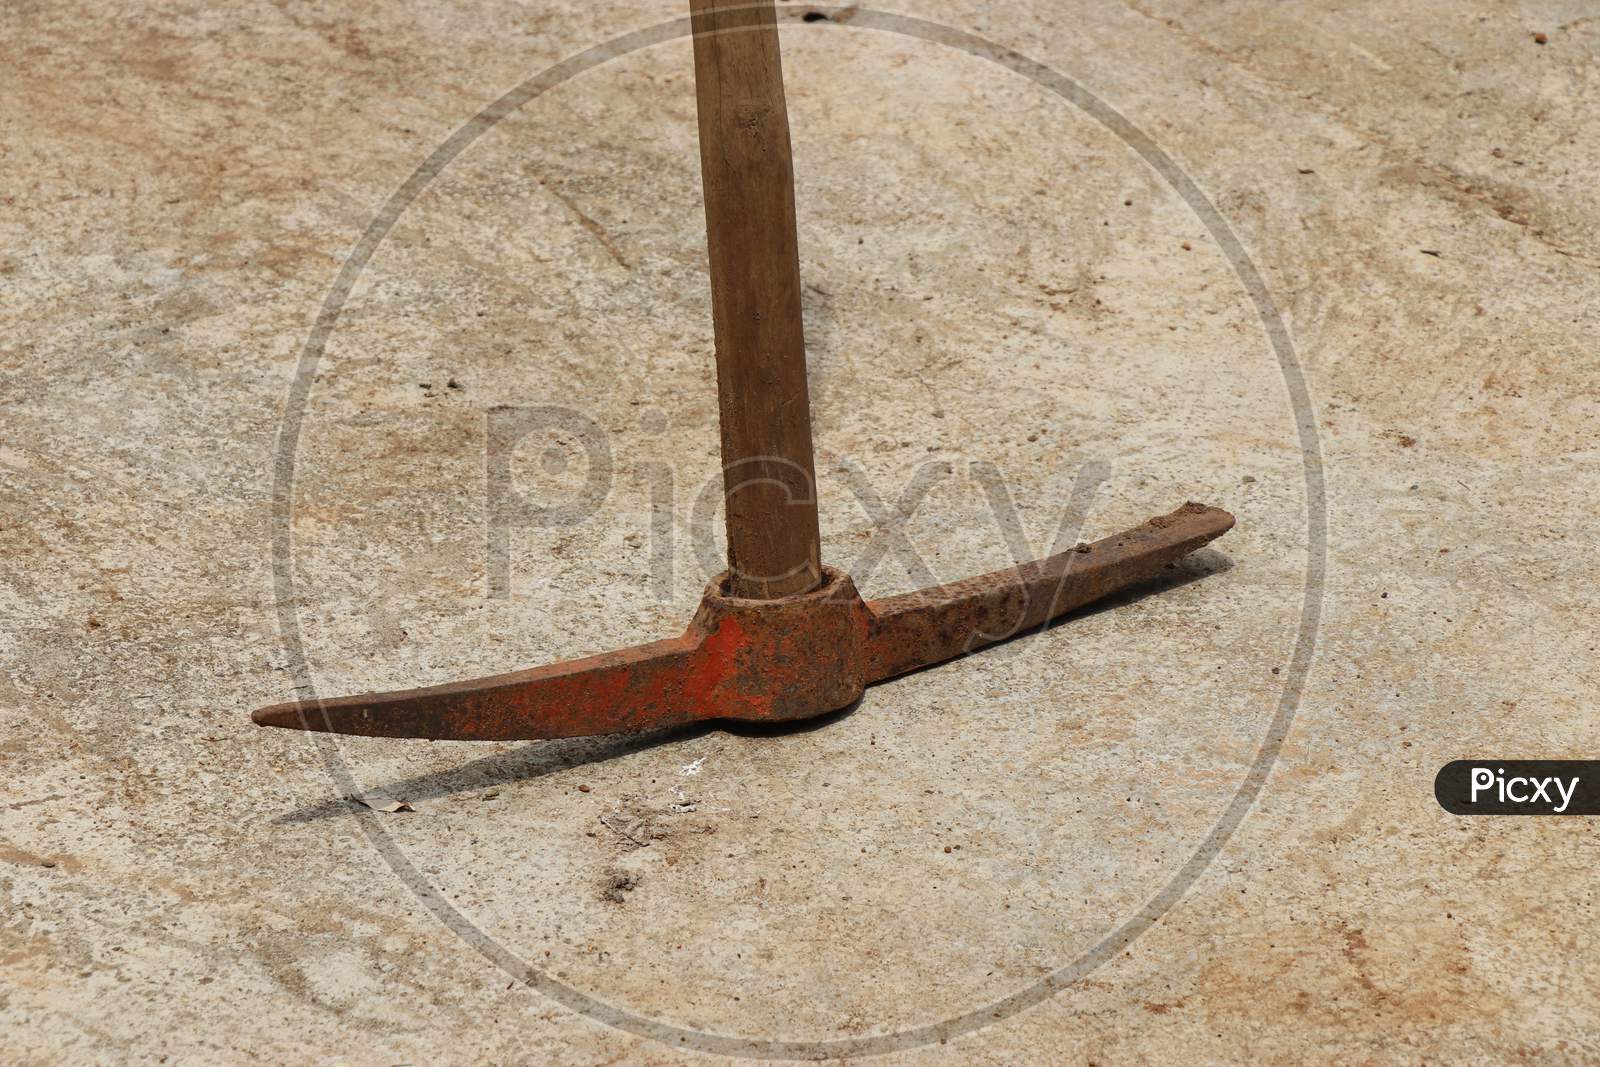 Pickaxe Which Is Old And Rusty With Wooden Handle Kept In Concrete Floor